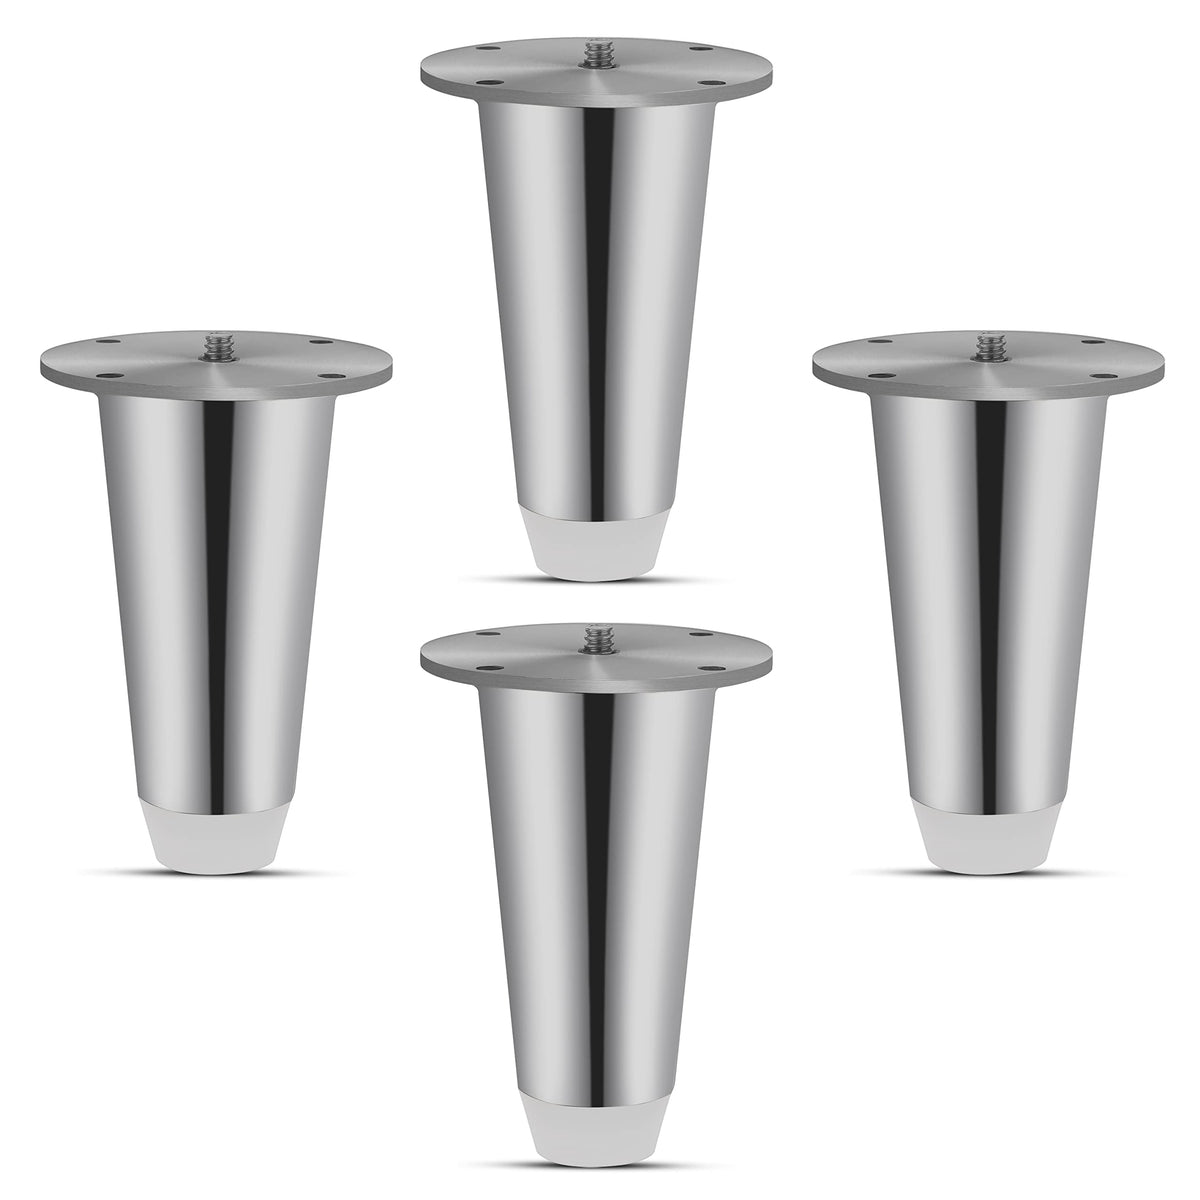 Plantex Heavy Duty Stainless Steel 4 inch Sofa Leg/Bed Furniture Leg Pair for Home Furnitures (DTS-53, Chrome) – 6 pcs